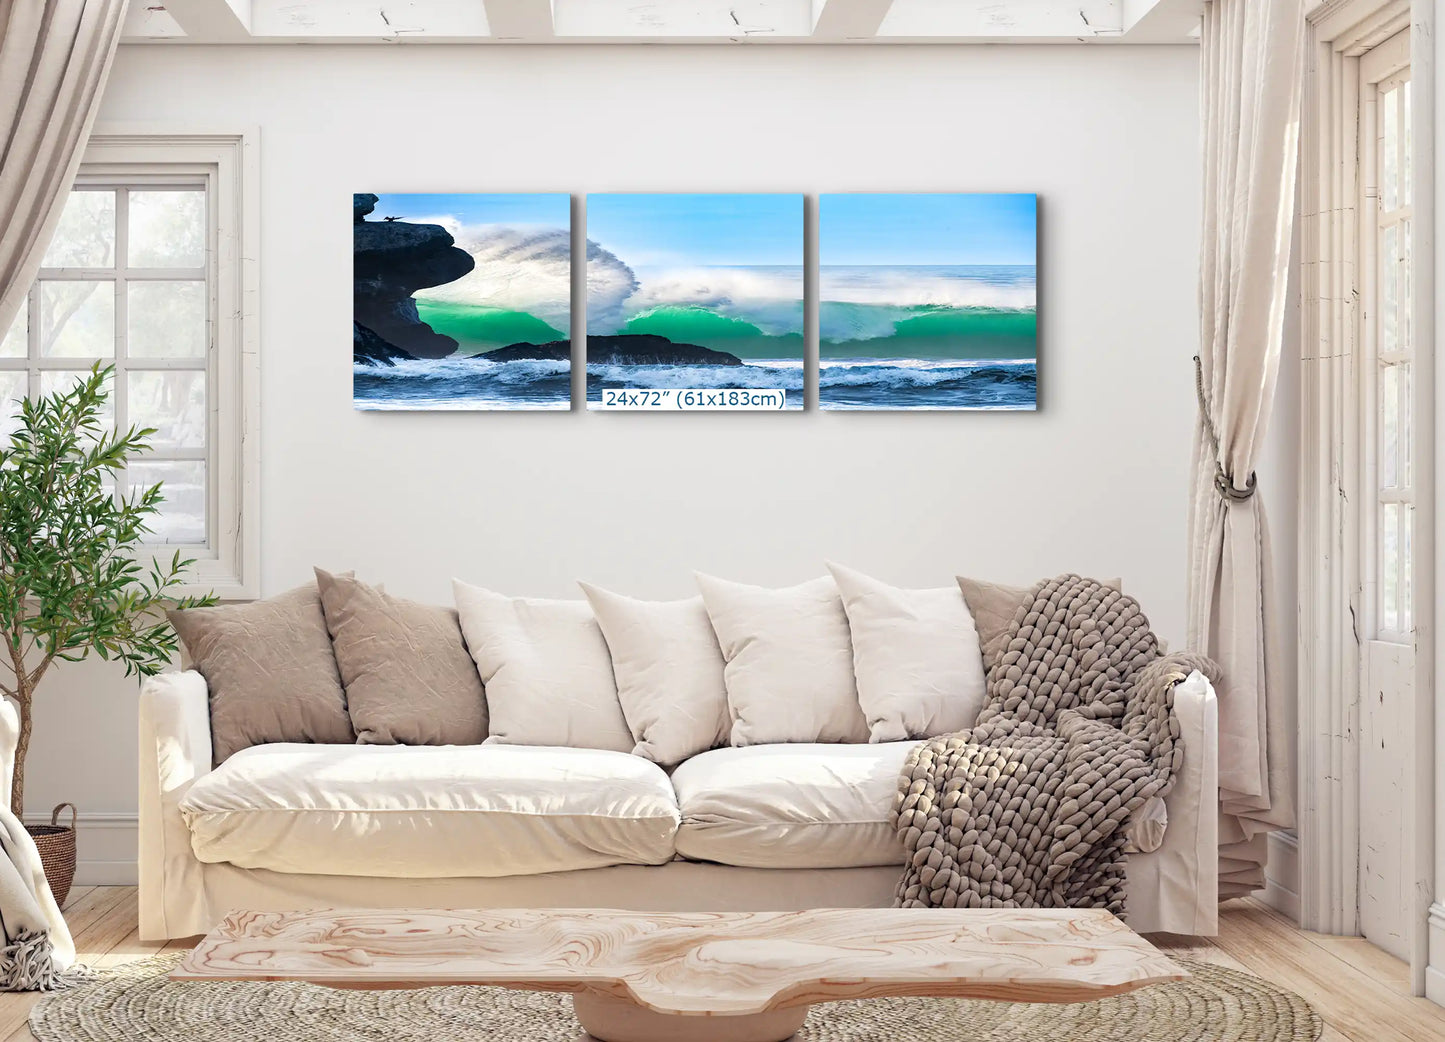 A 24"x72" triptych canvas set of an ocean wave by Morro Rock, spans across the living room wall, offering a panoramic view.